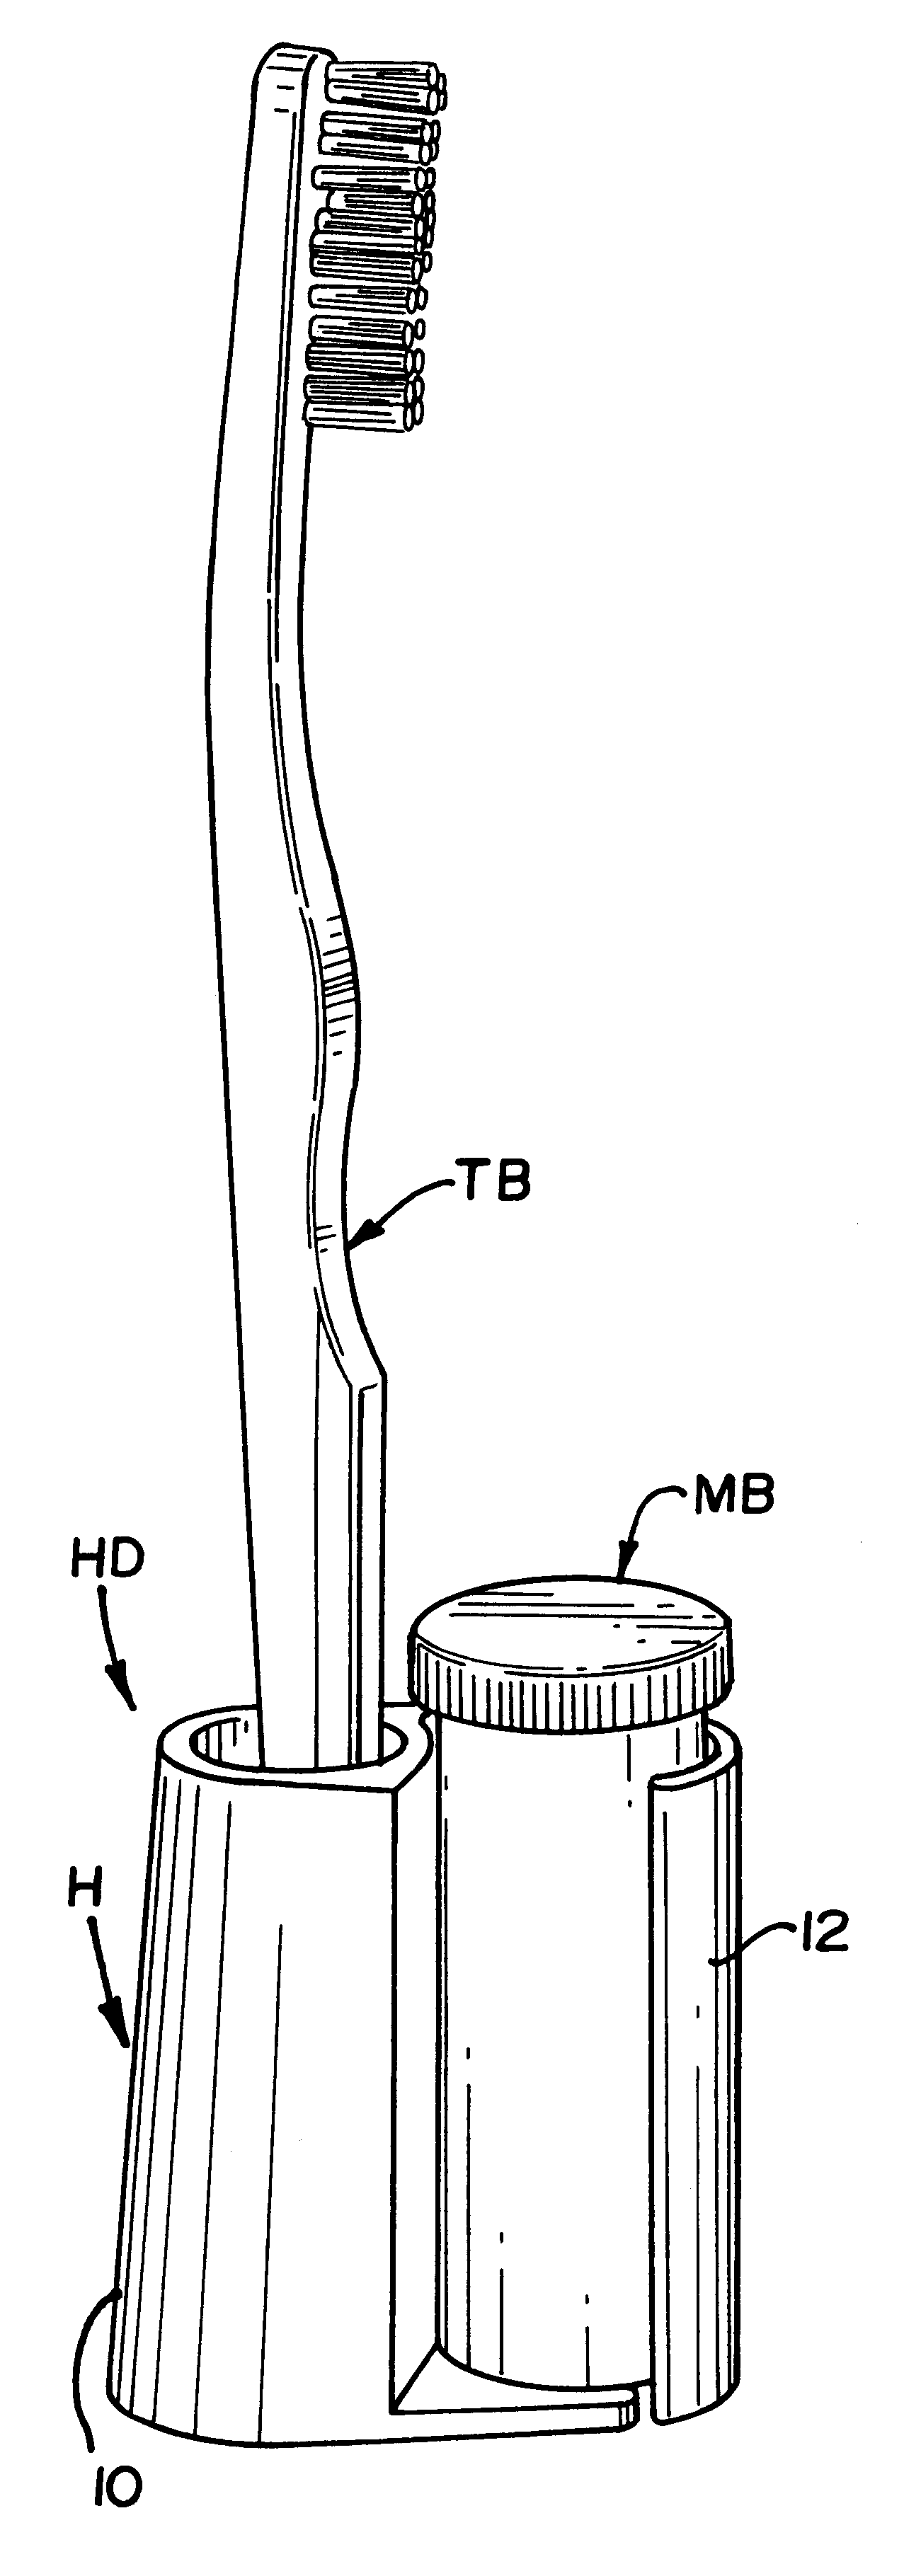 Health improvement device for modifying a daily behavior by reminding a person to take medication